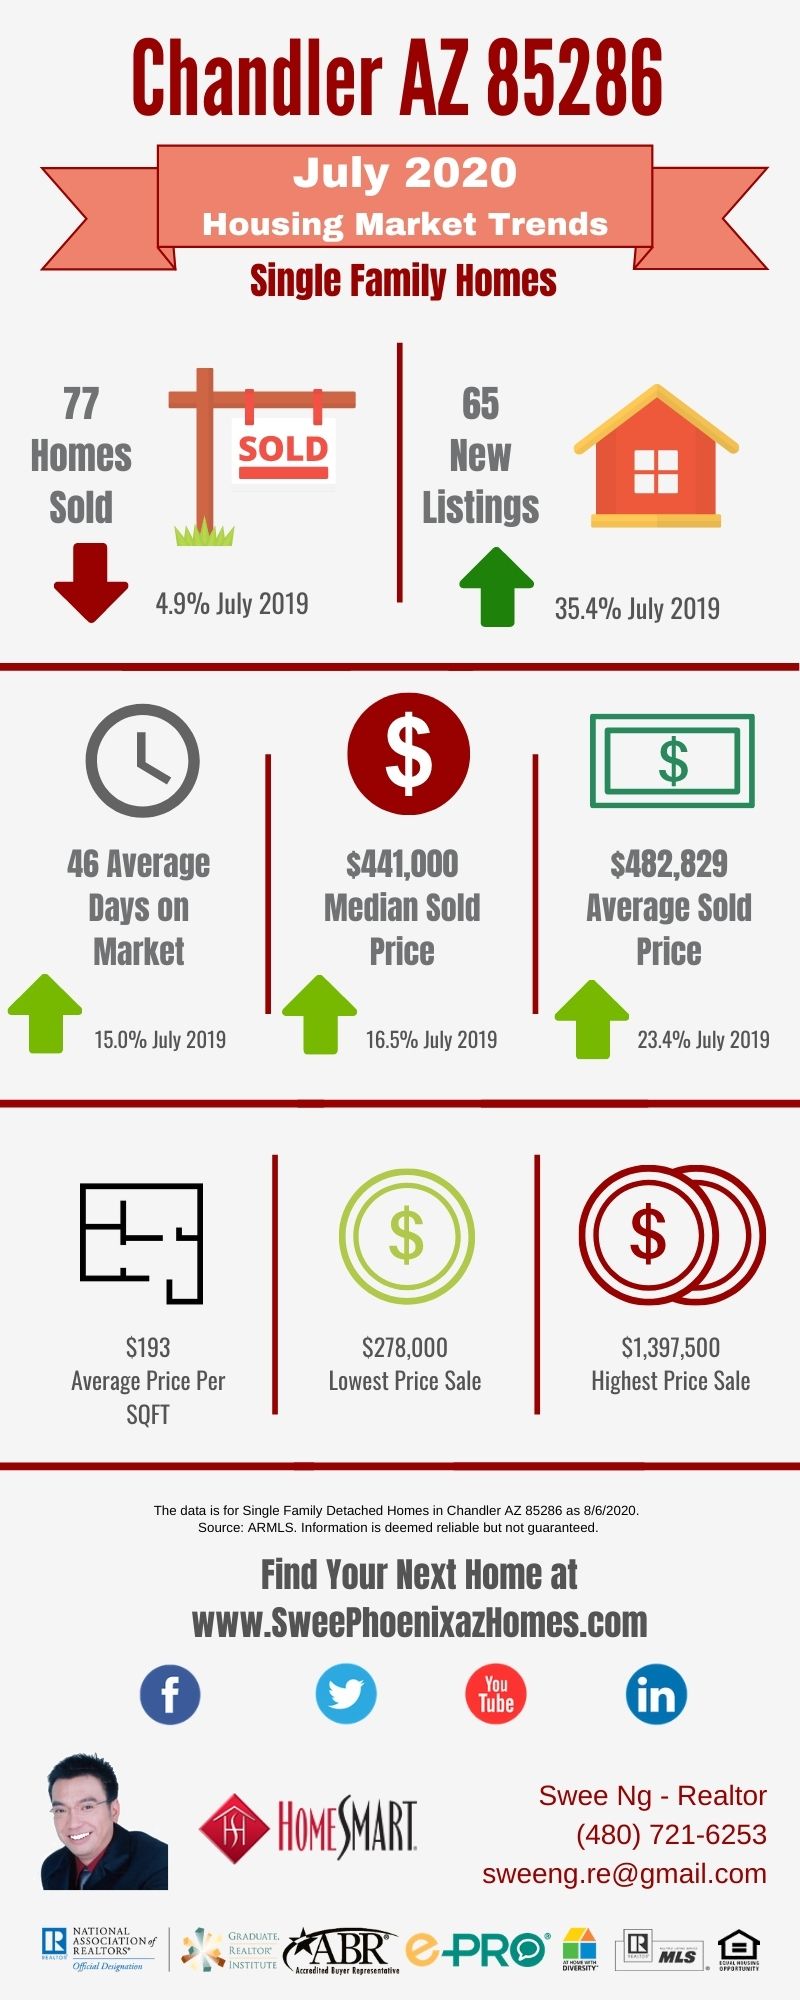 Chandler AZ 85286 Housing Market Trends Report July 2020, House Value, Real Estate and Statistic by Swee Ng